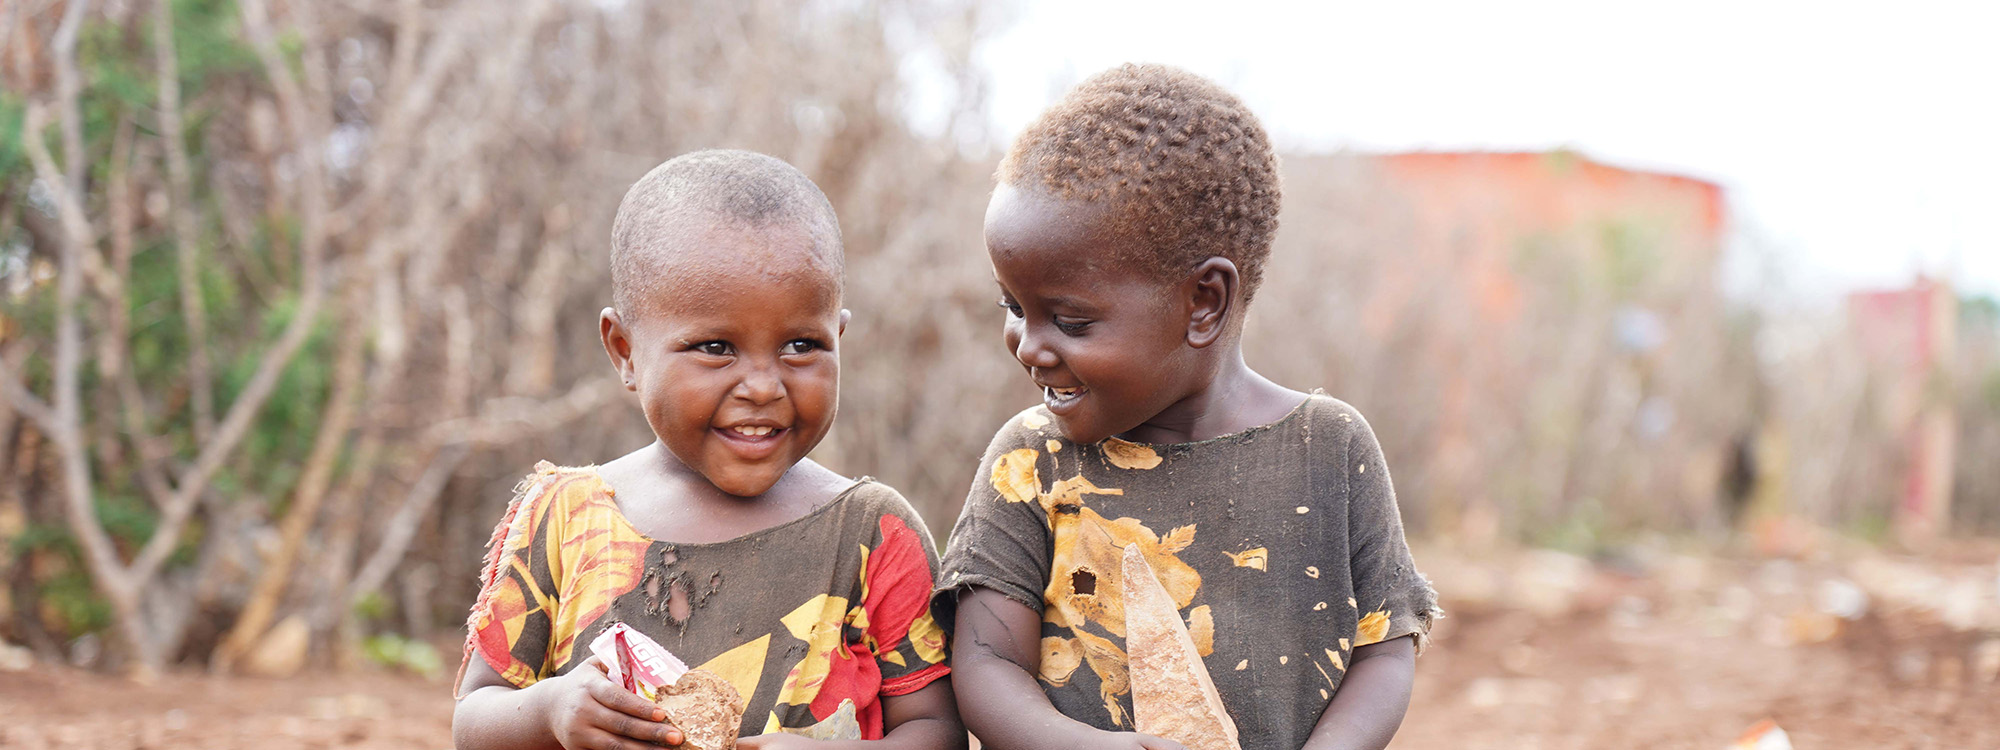 Two young boys smiling in Somalia